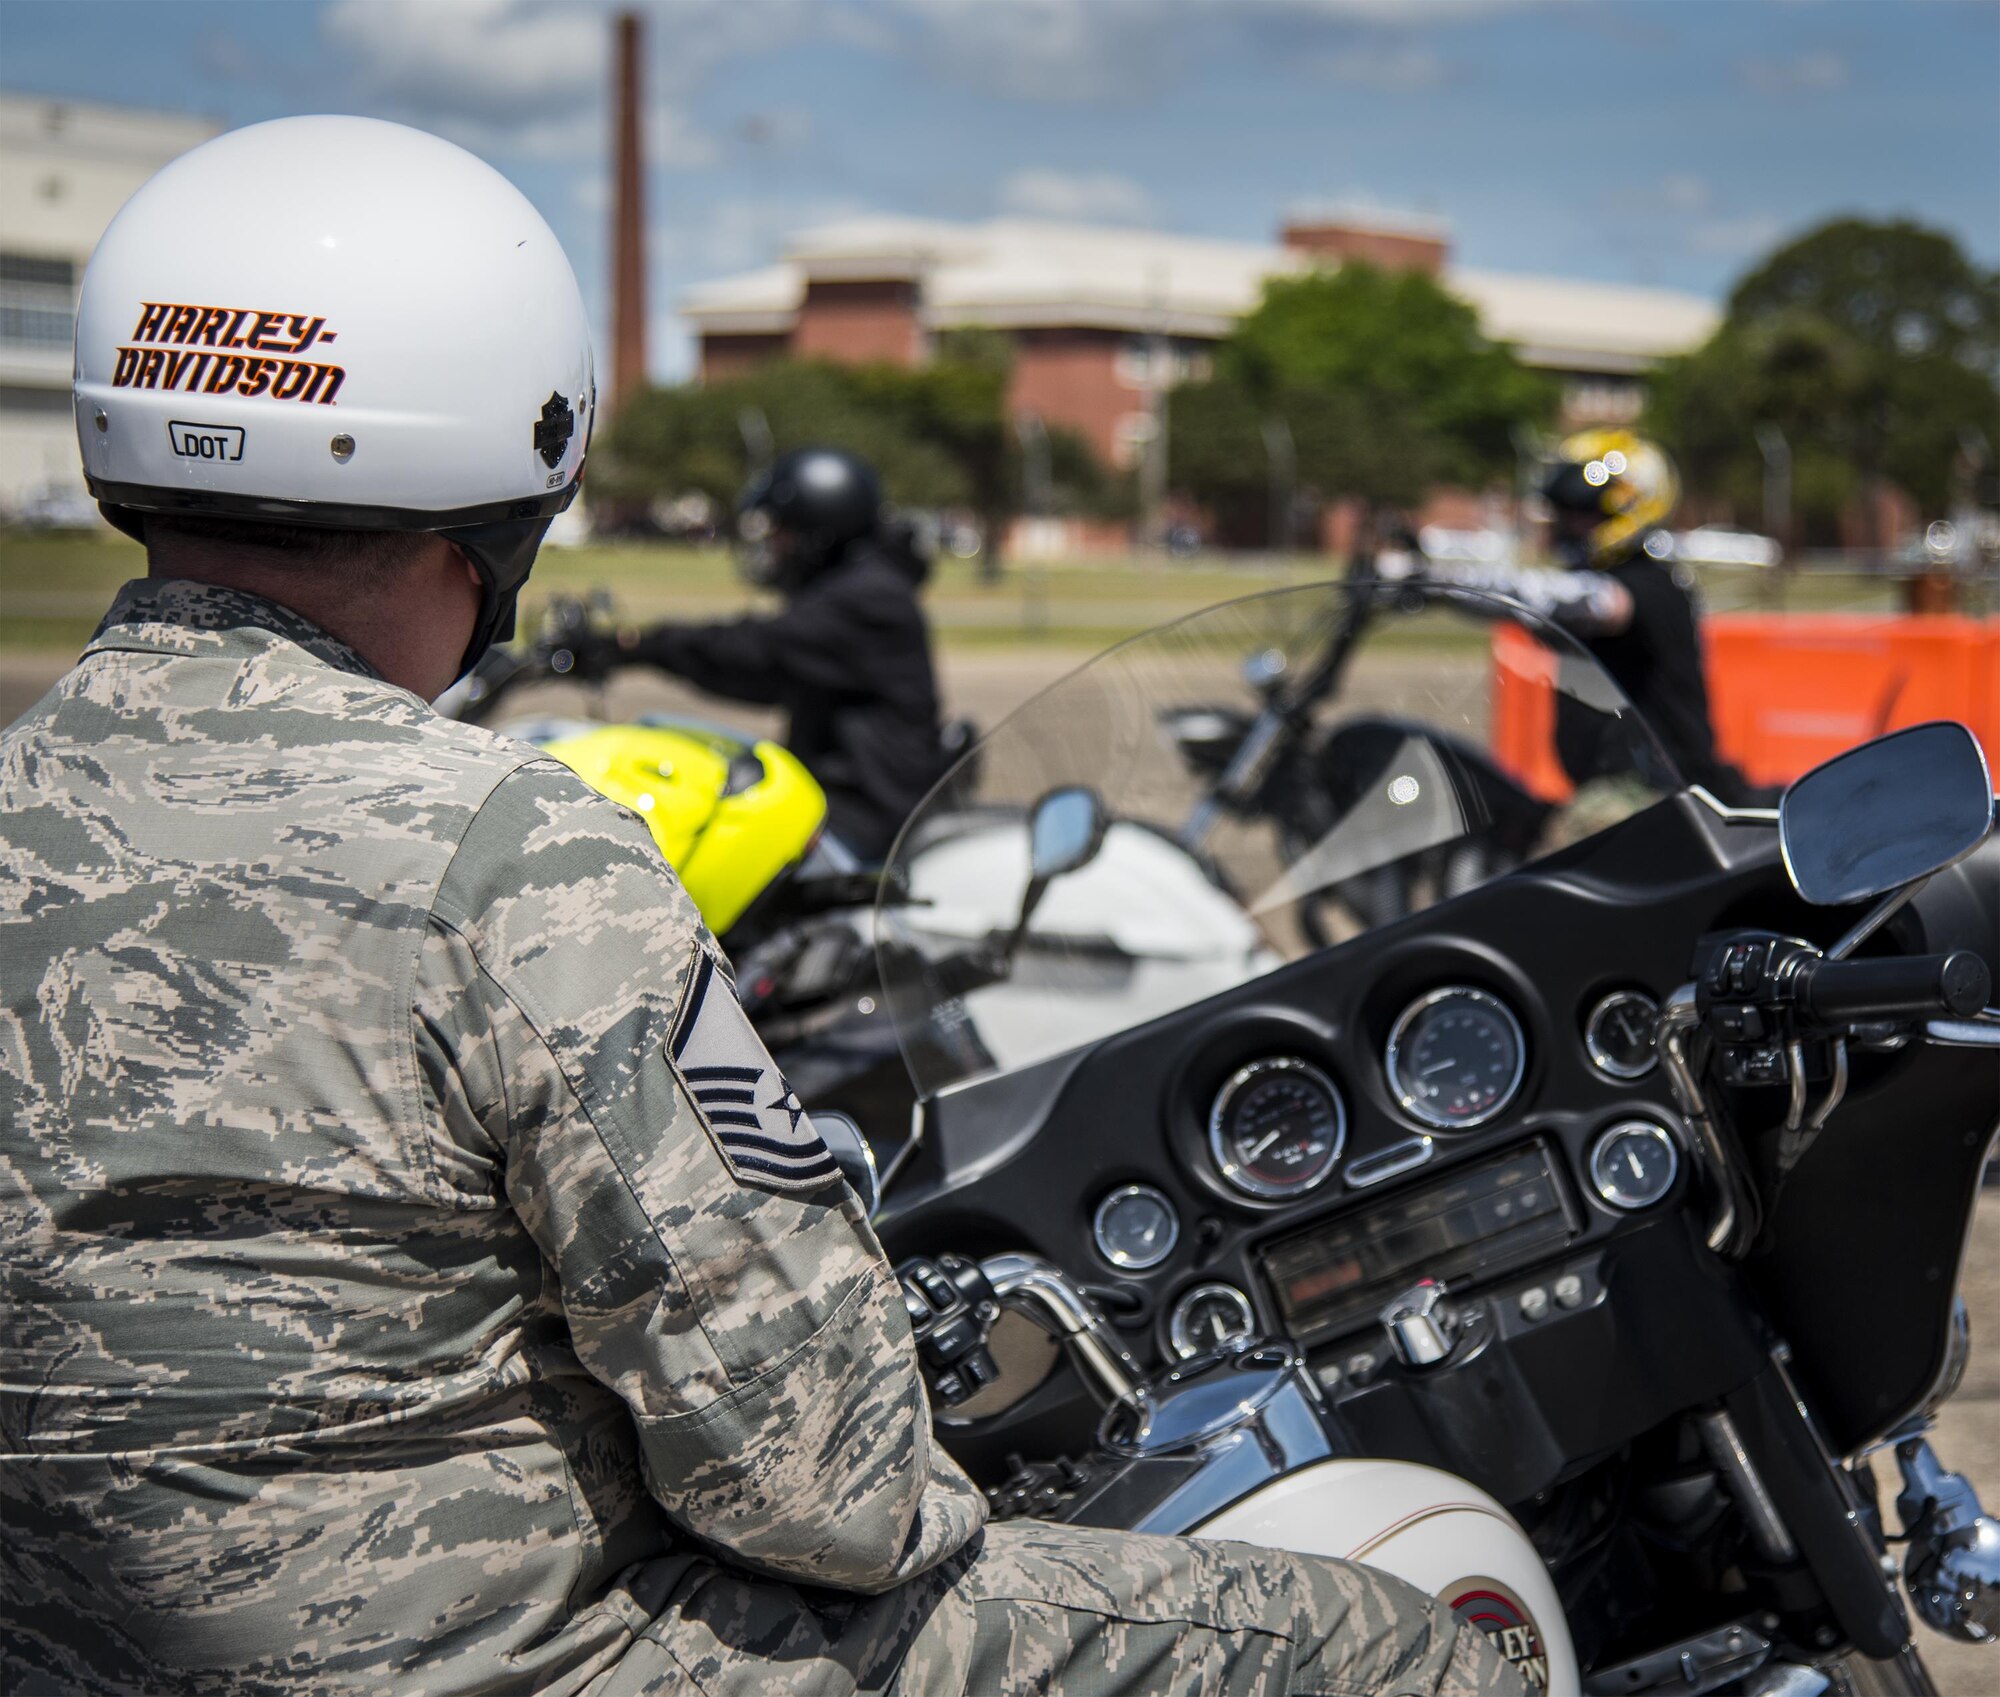 A master sergeant watches as bikers roll out after the annual motorcycle safety rally at Eglin Air Force Base, Fla., April 14.  More than 500 motorcyclists came out for the event that meets the annual safety briefing requirement for base riders.  (U.S. Air Force photo/Samuel King Jr.)